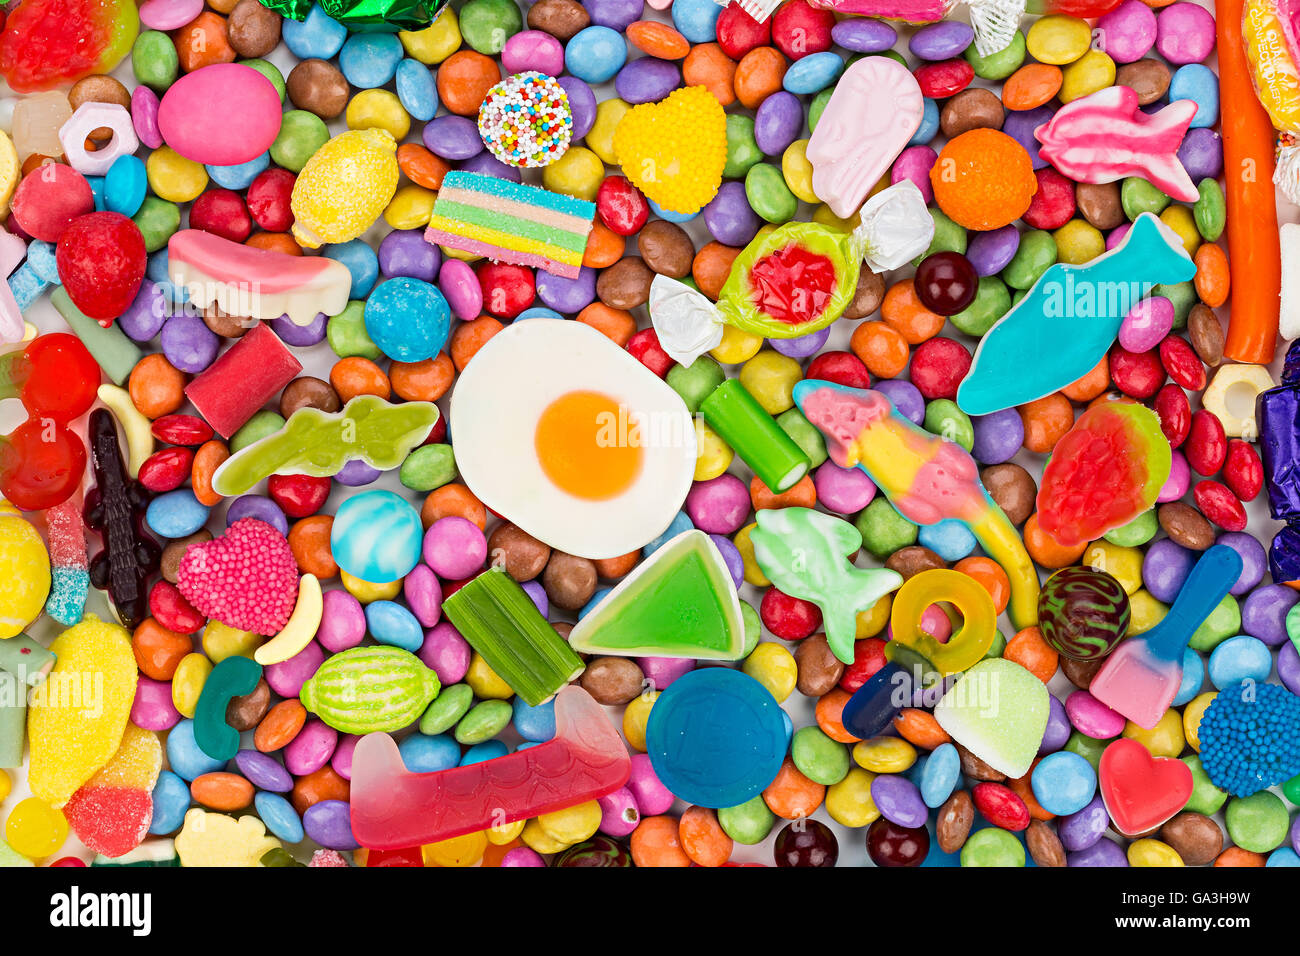 background of colorful tasty candies Stock Photo